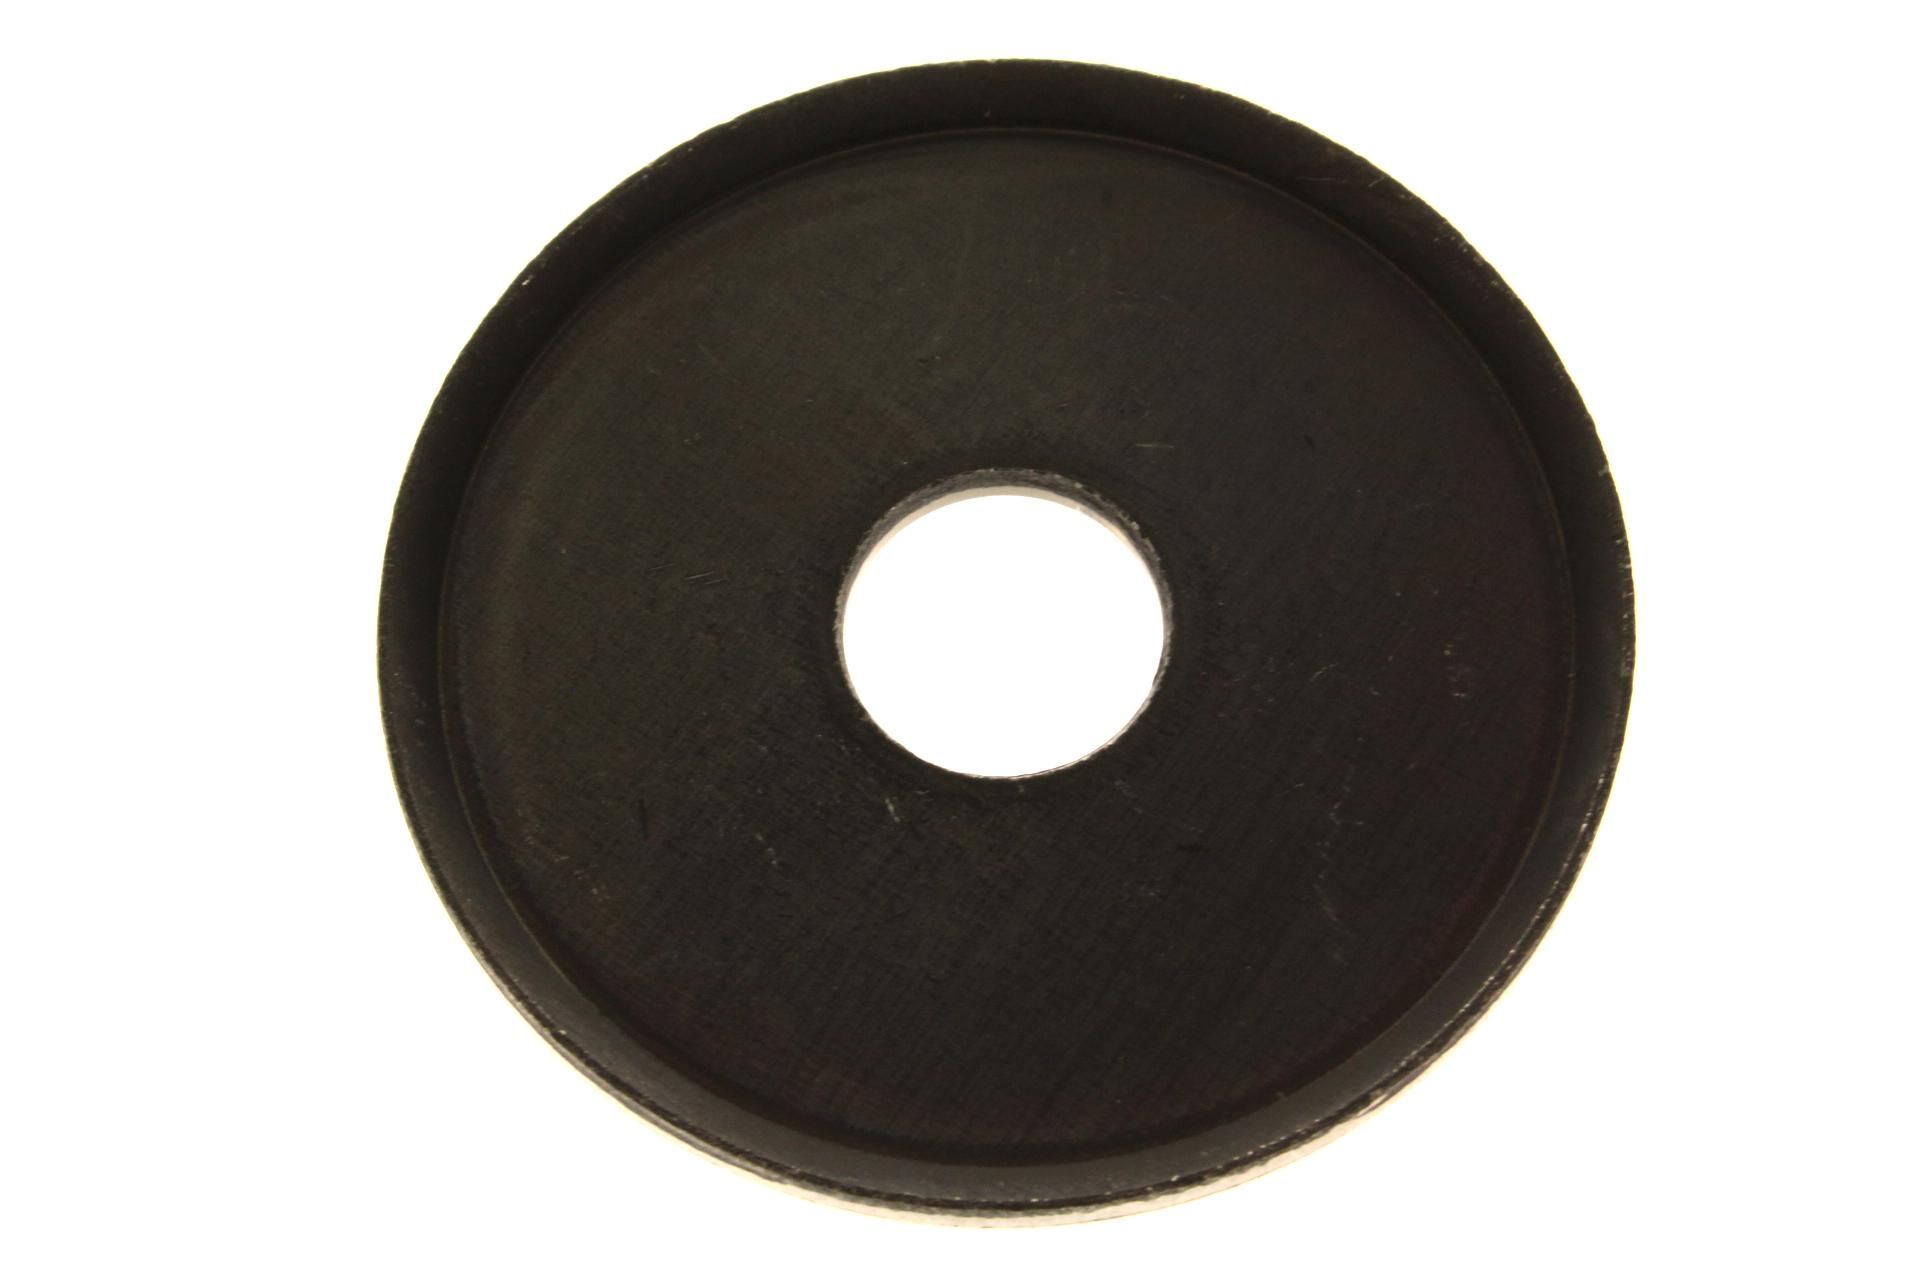 90209-12151-00 WASHER, SPECL SHAP